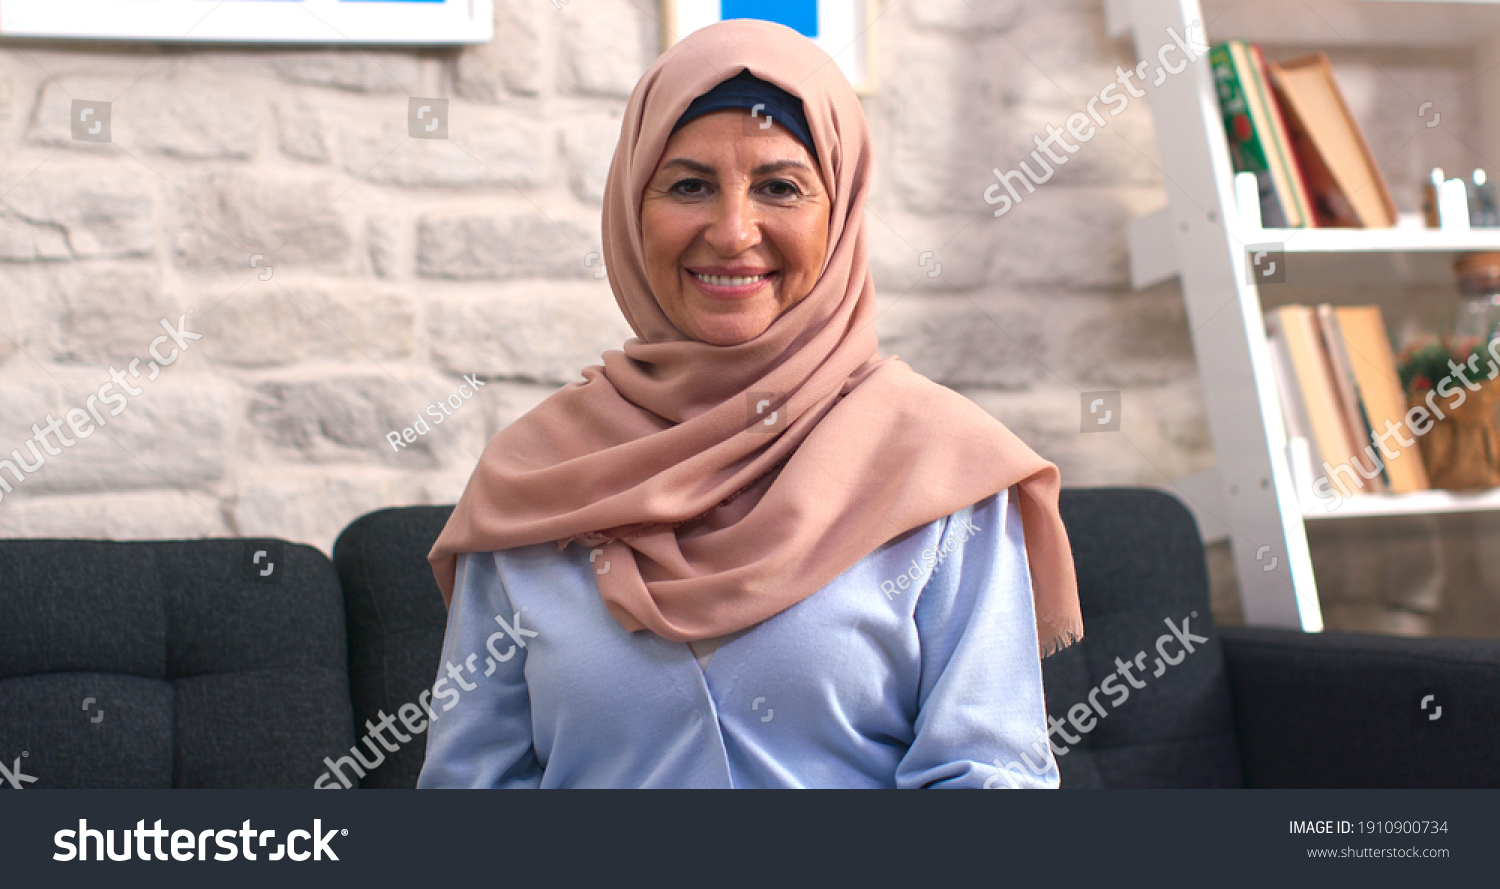 Beautiful face portrait of happy mature middle-aged woman in hijab. Old lady in turban looking at camera with healthy cheerful smile.  #1910900734